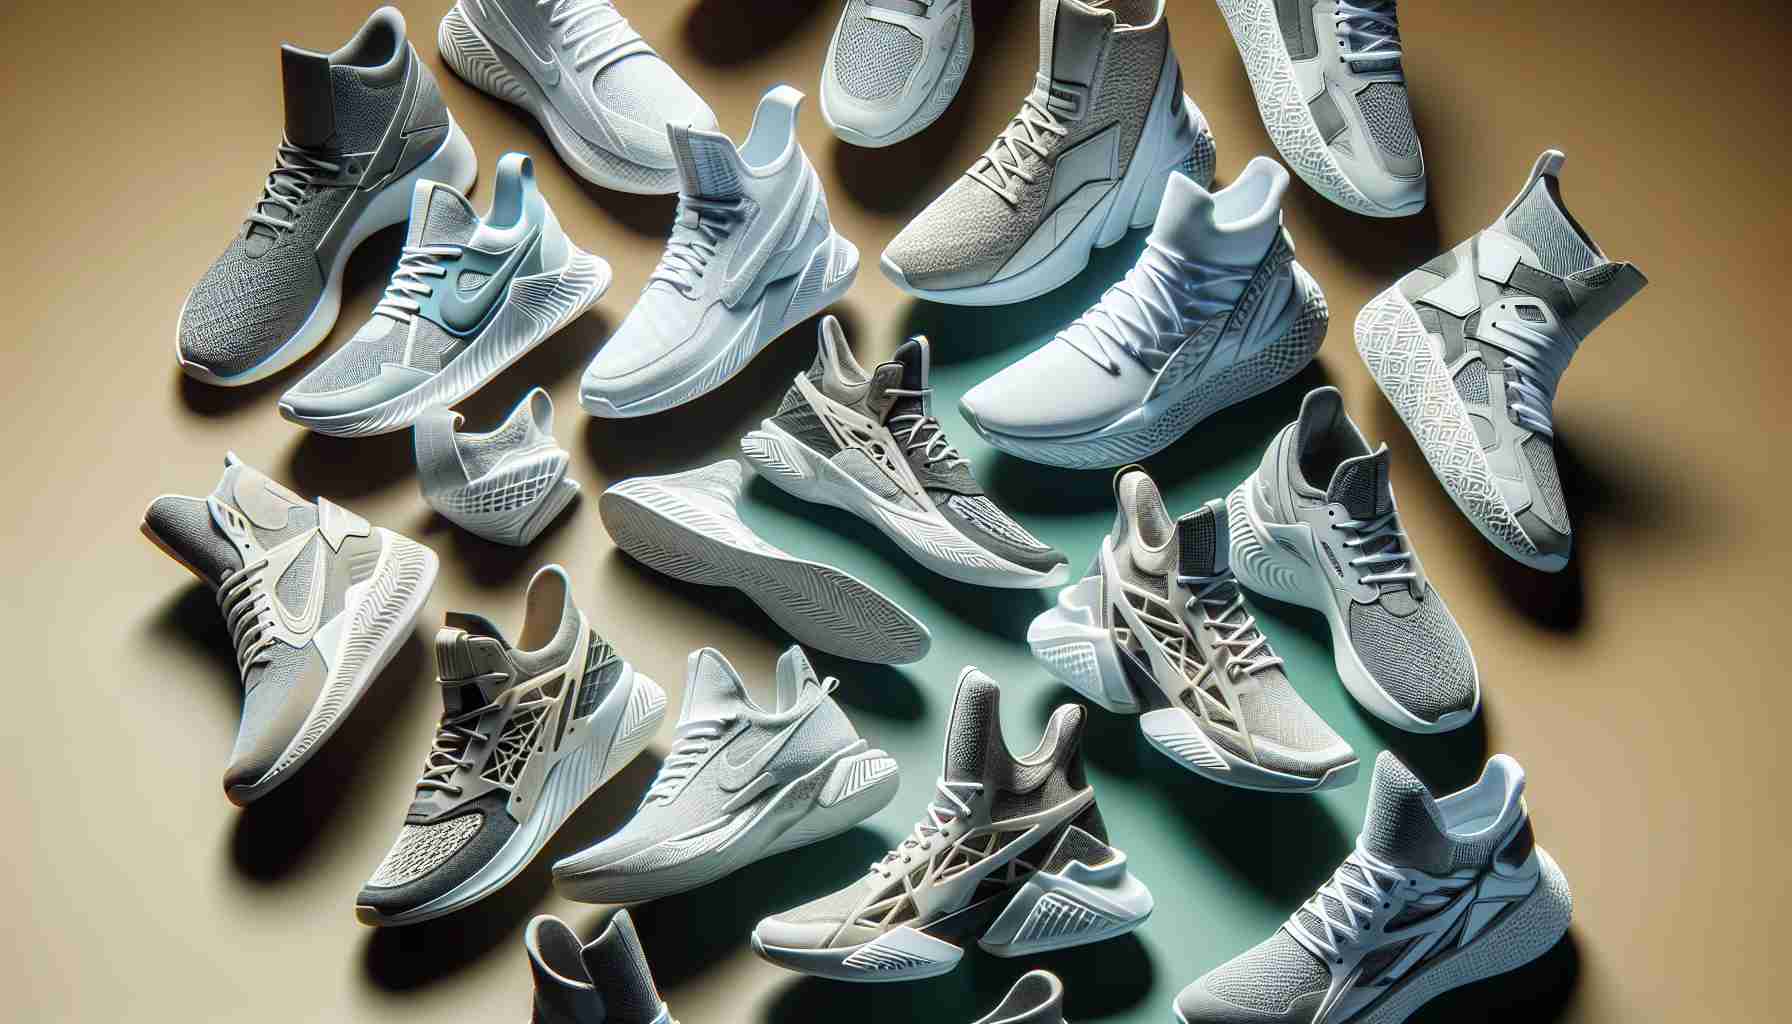 High-resolution photo depicting an array of innovative sneaker styles, whose unique and cutting-edge designs have led to an increase in the stock value of a major sports footwear company. These sneakers are well-crafted with advanced materials, displaying a blend of fashion and functionality.